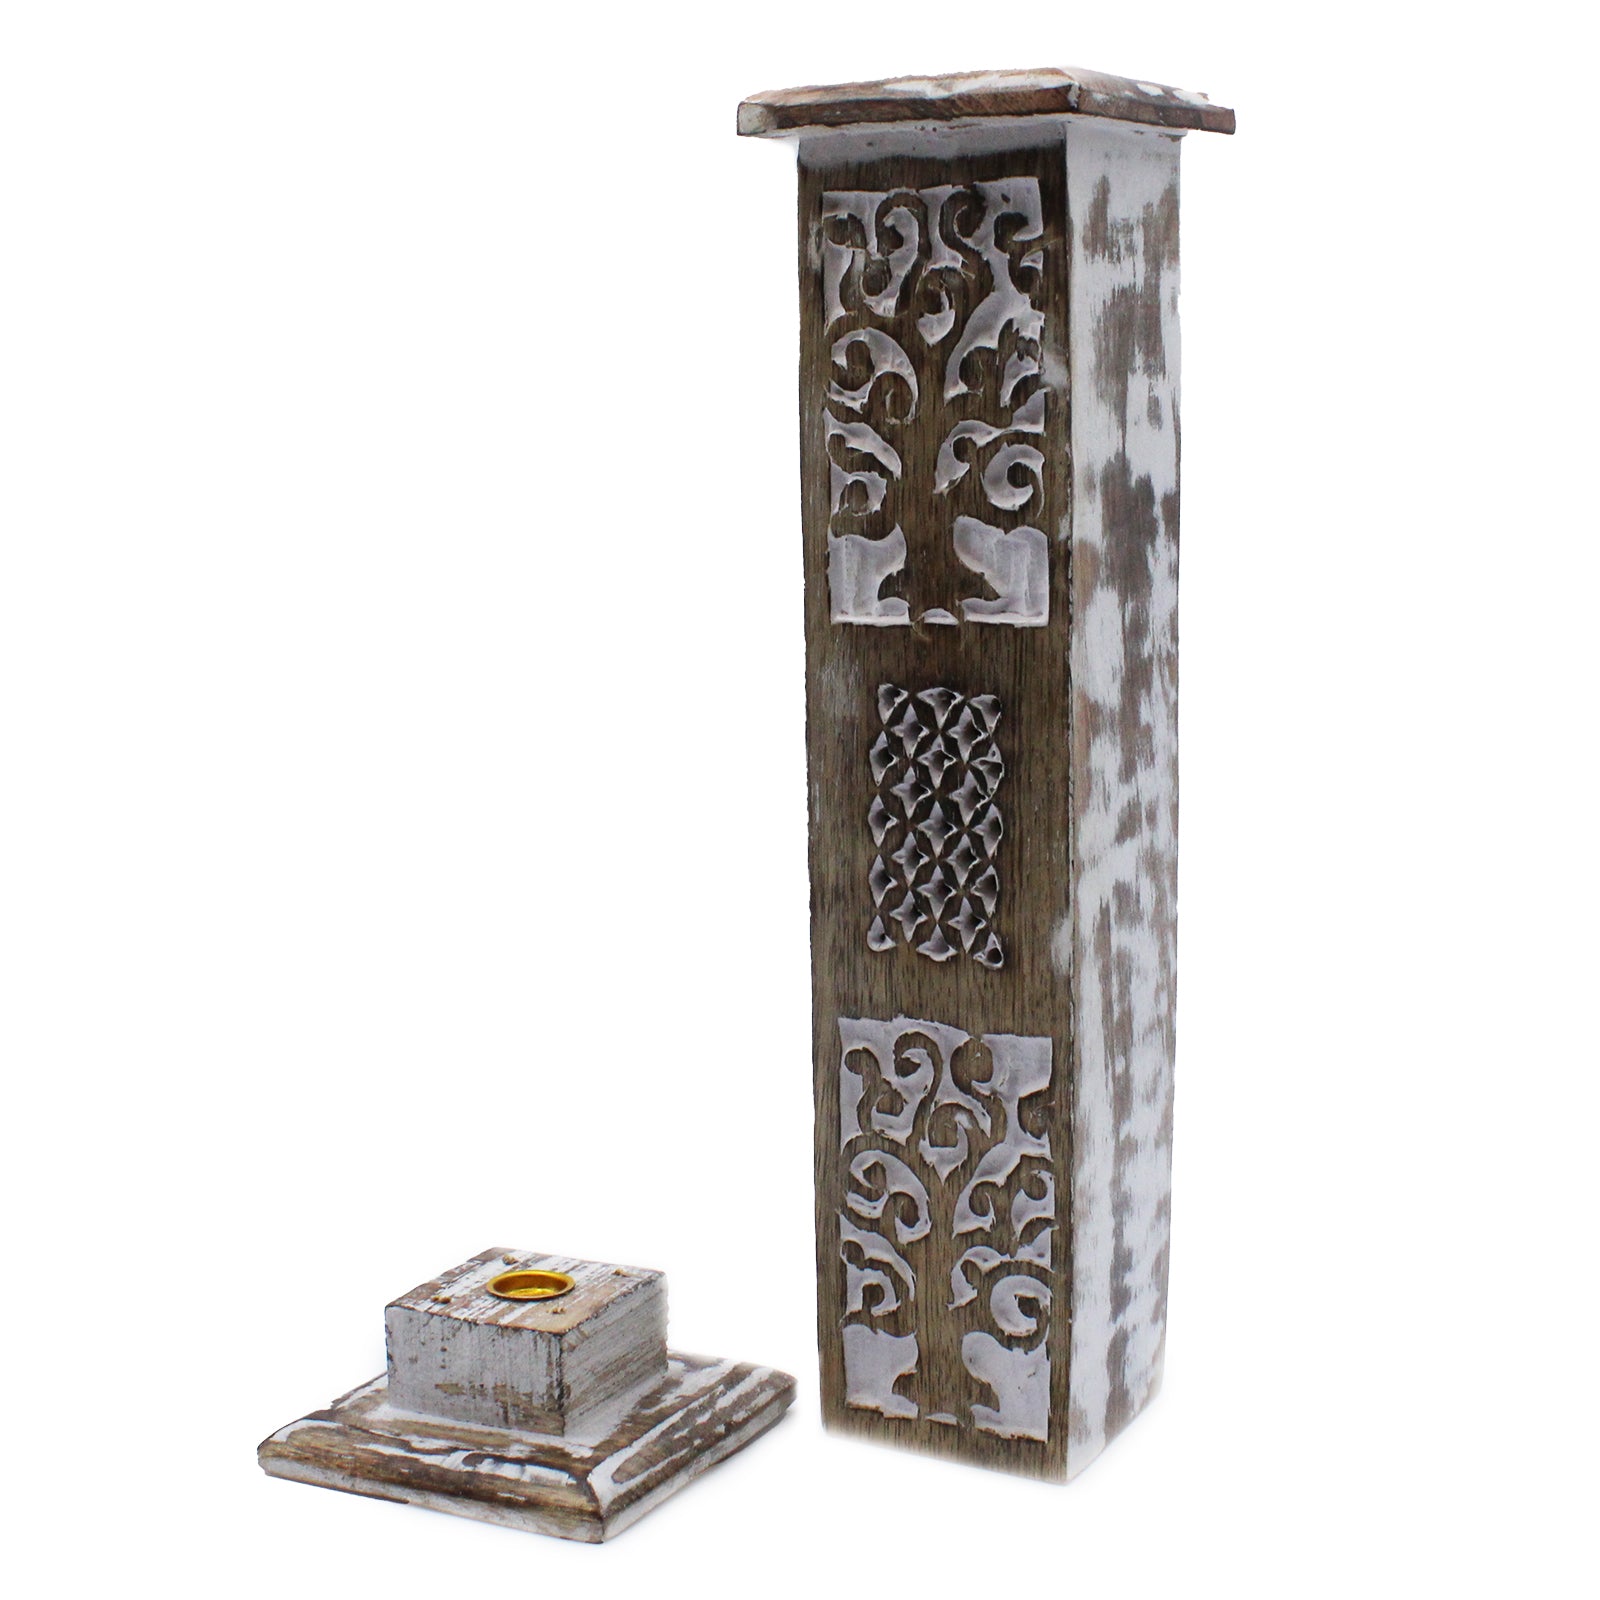 View White Washed Incense Holder Smoke Tower information